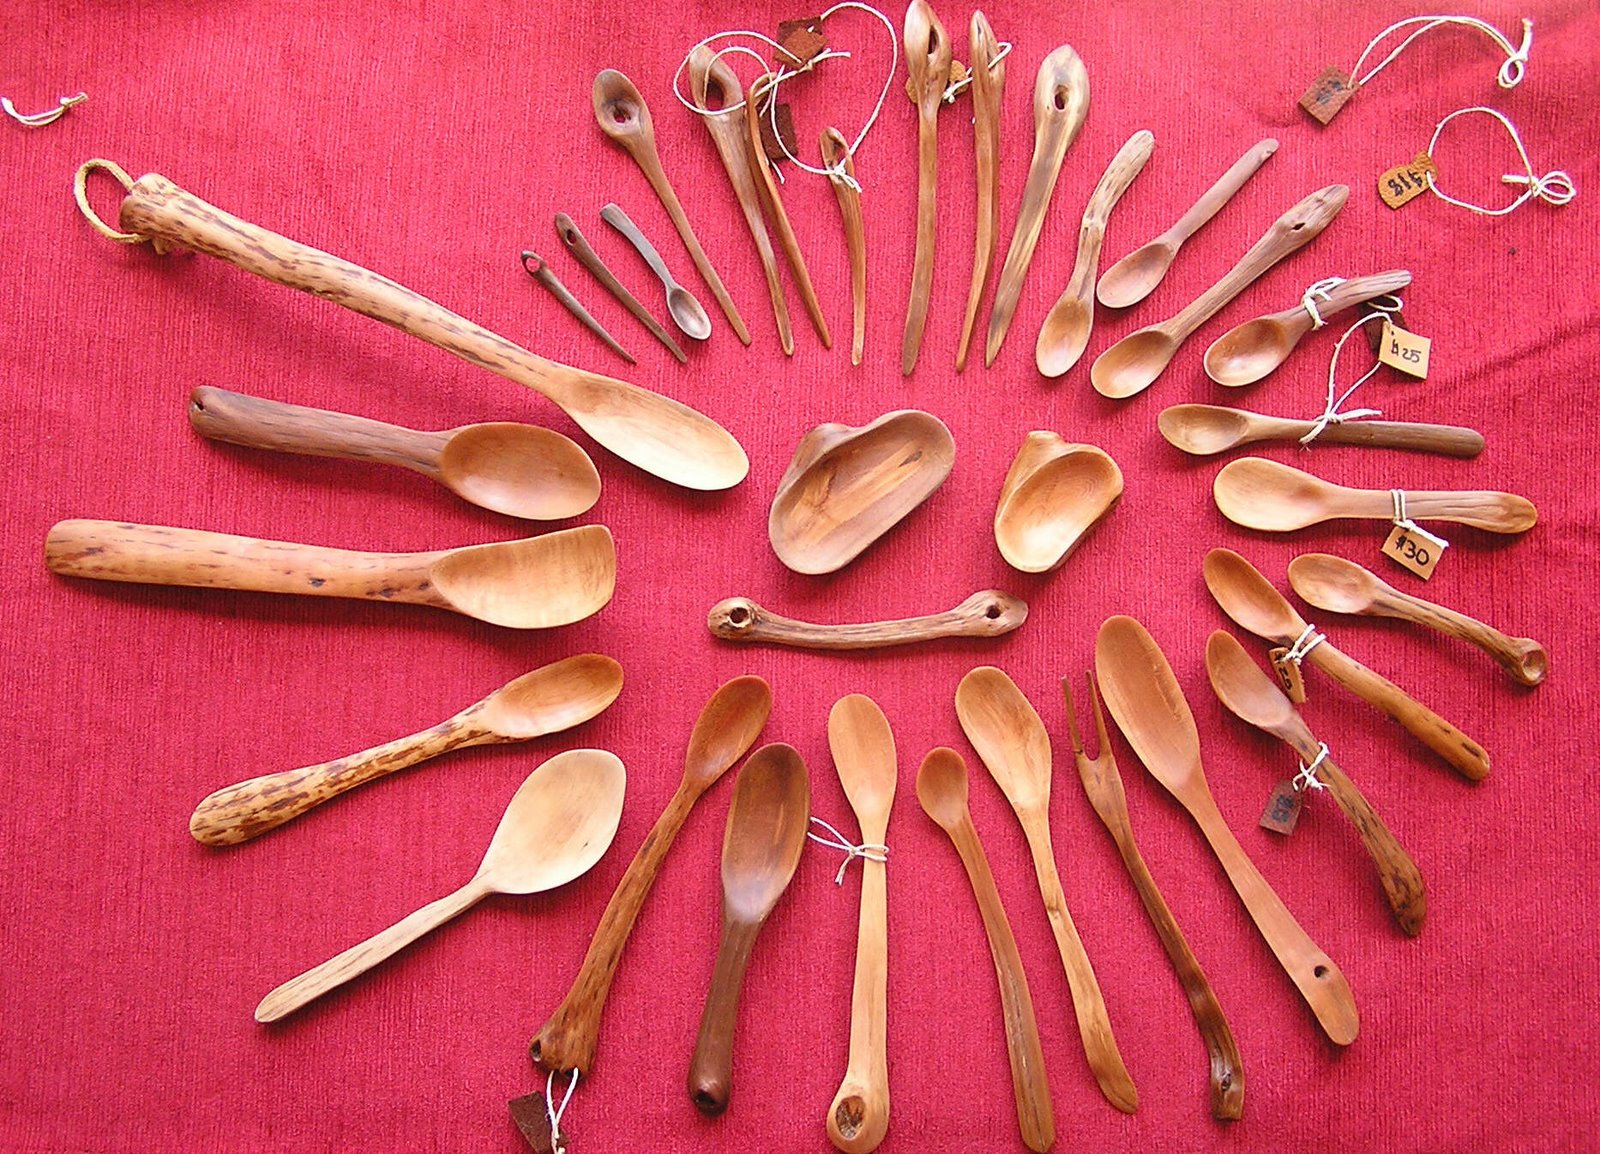 [Spoon_collection.JPG]